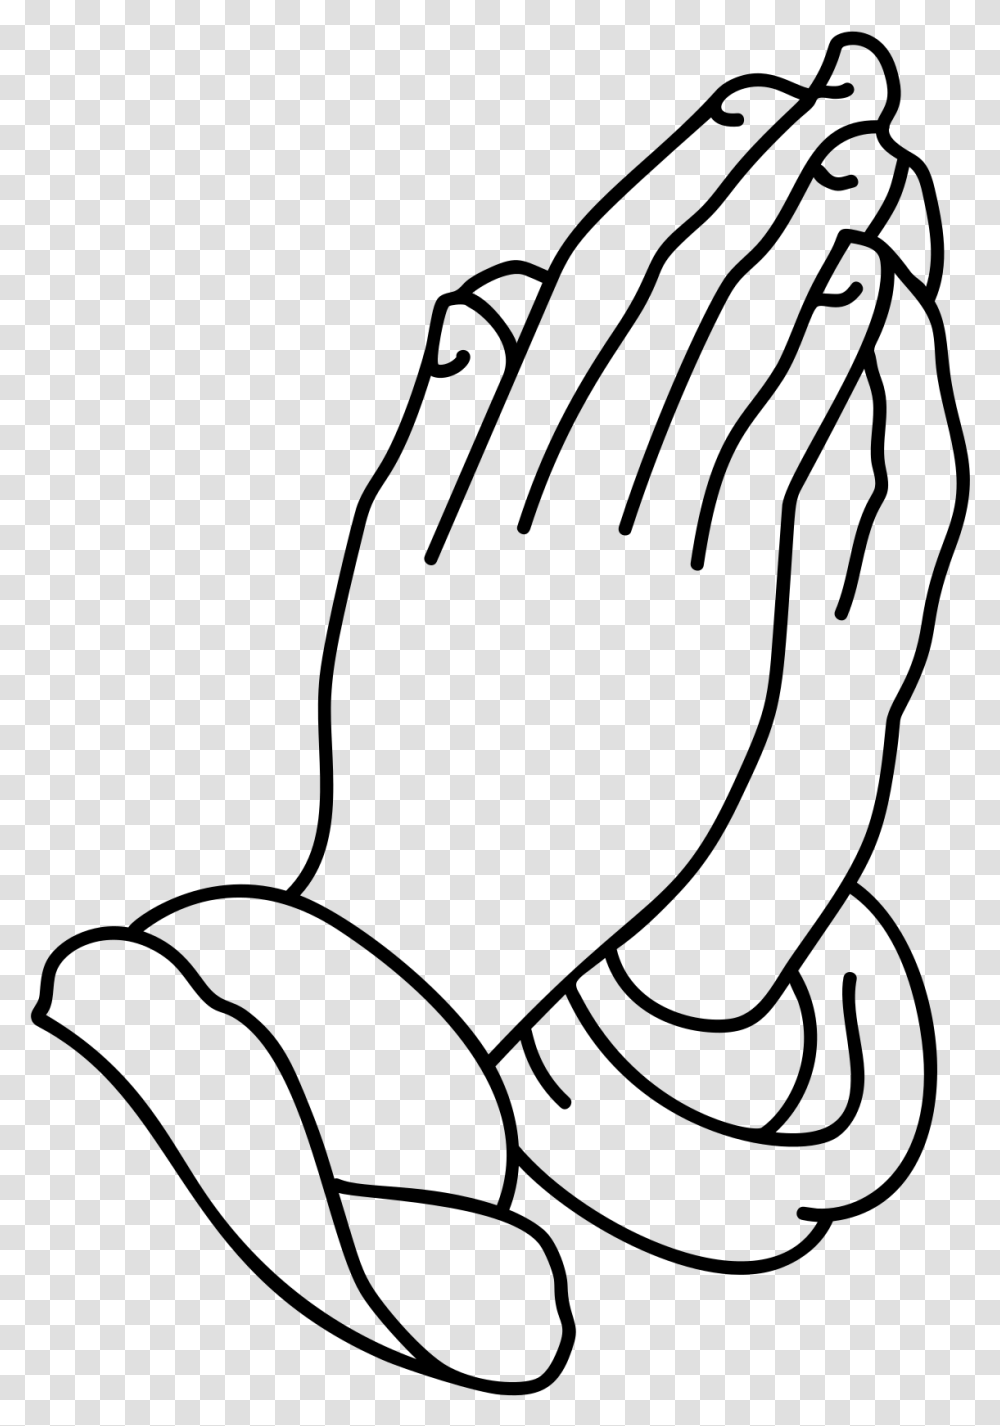 Praying Hands Lineart Black And White Clip Art Praying Hands And Cross, Gray, World Of Warcraft Transparent Png